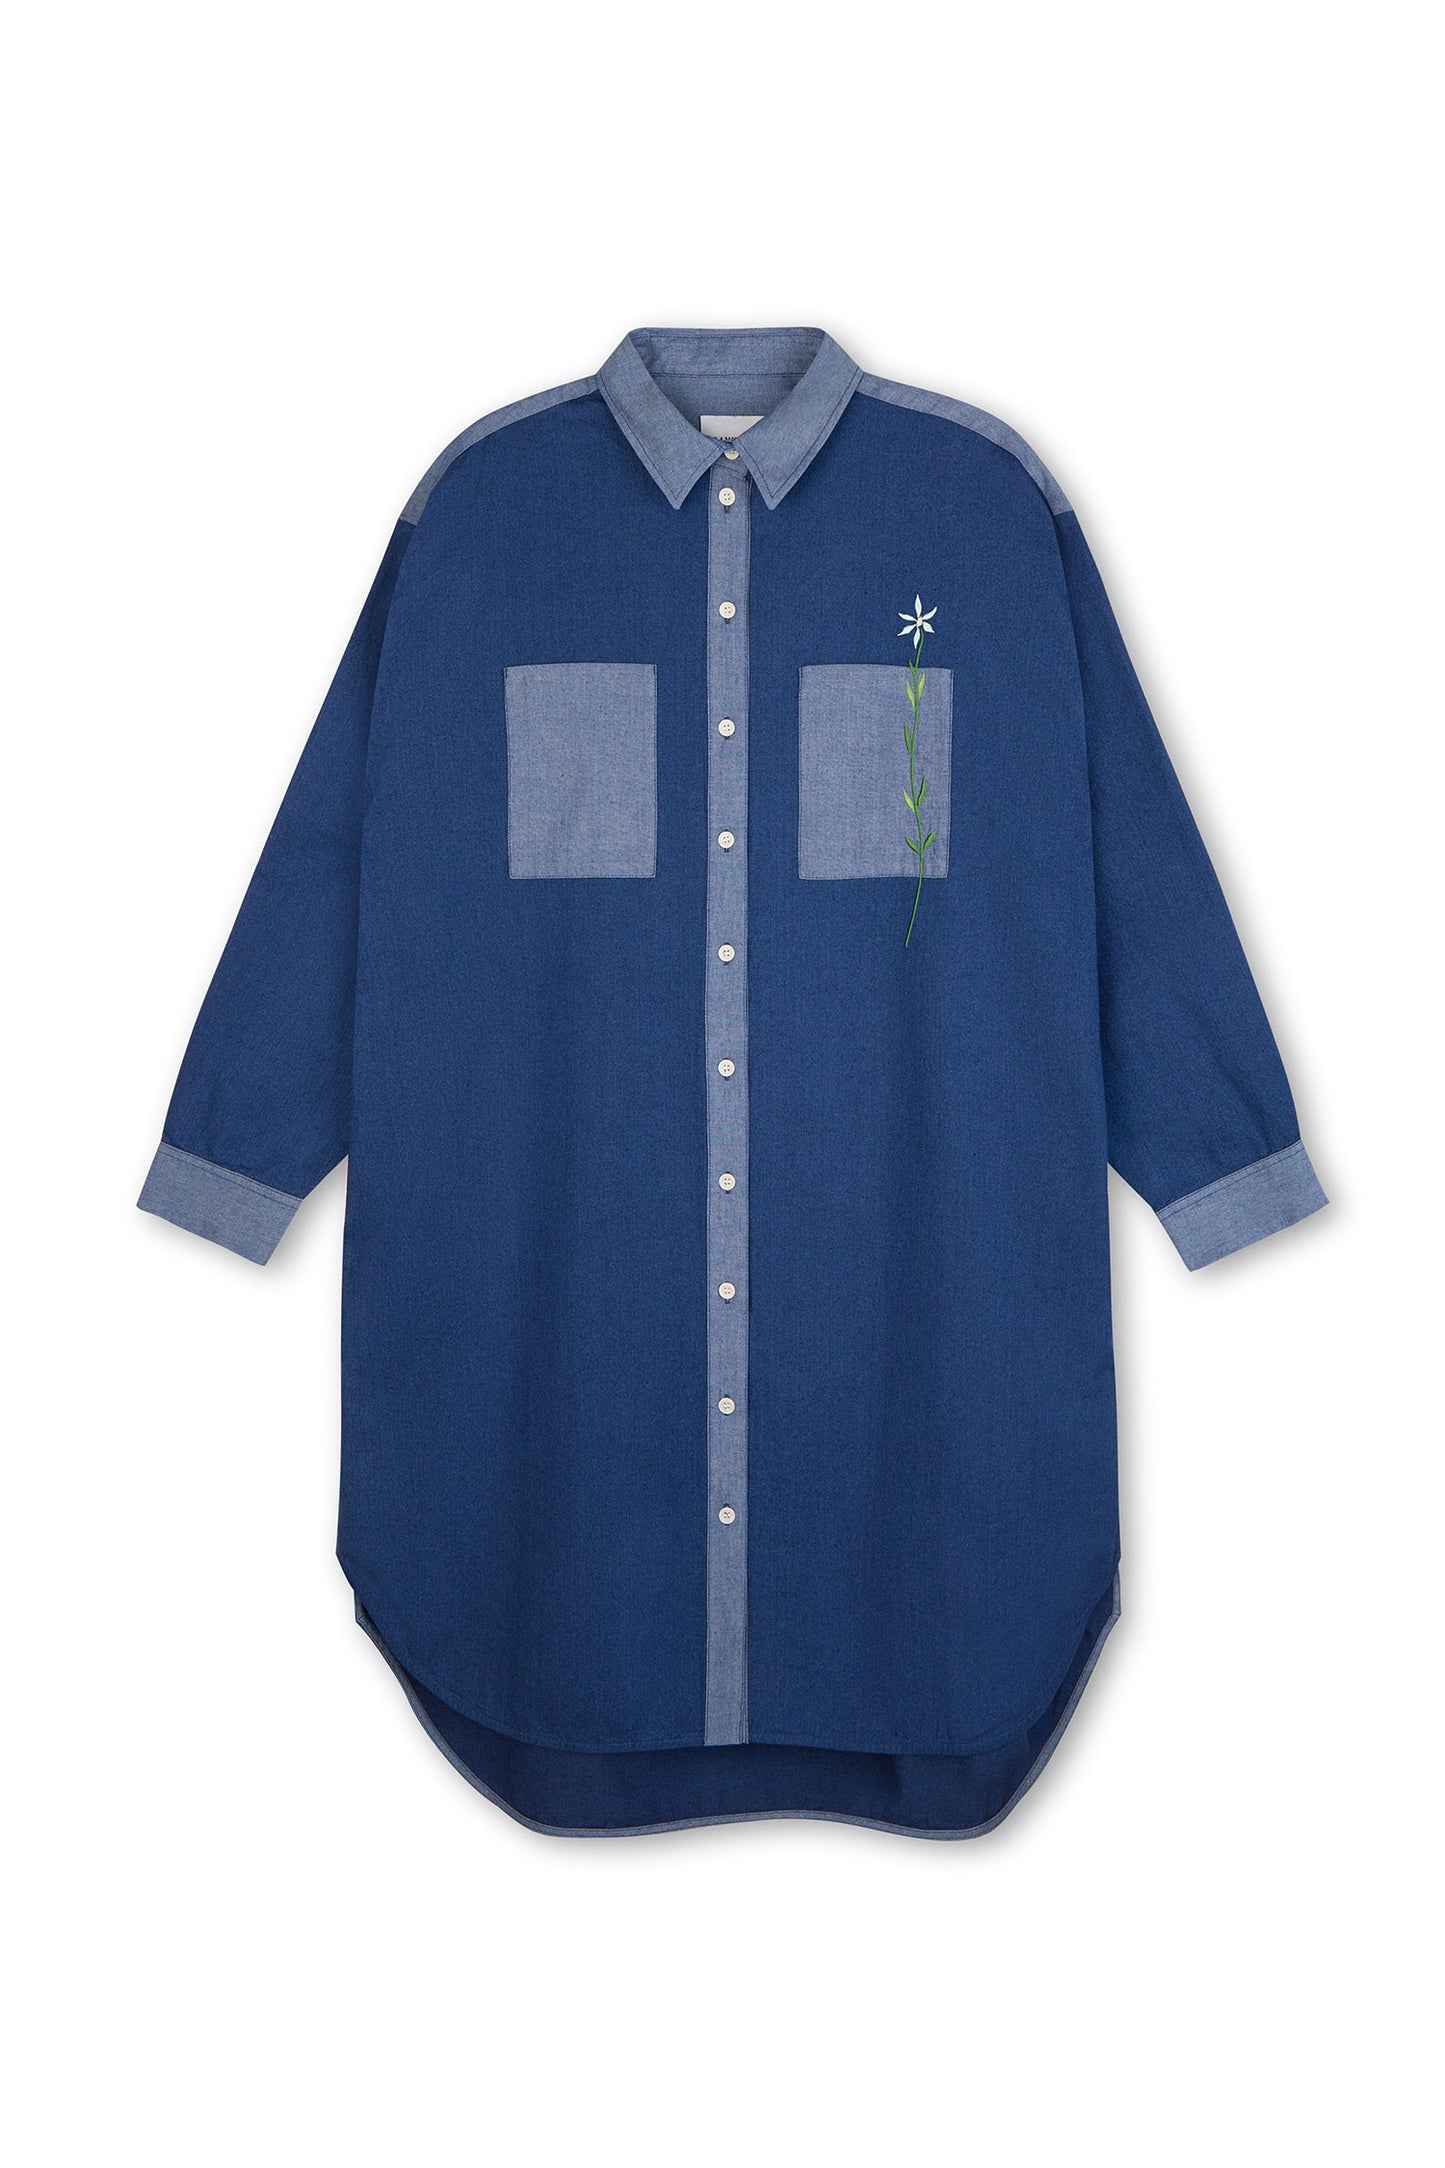 Womens Oversized Shirtdress in Japanese Denim, with lighter wash contrasting collar, placket, cuffs and pocket. Right pocket has a flower embroidery positioned through the pocket. Dress is on a white background.